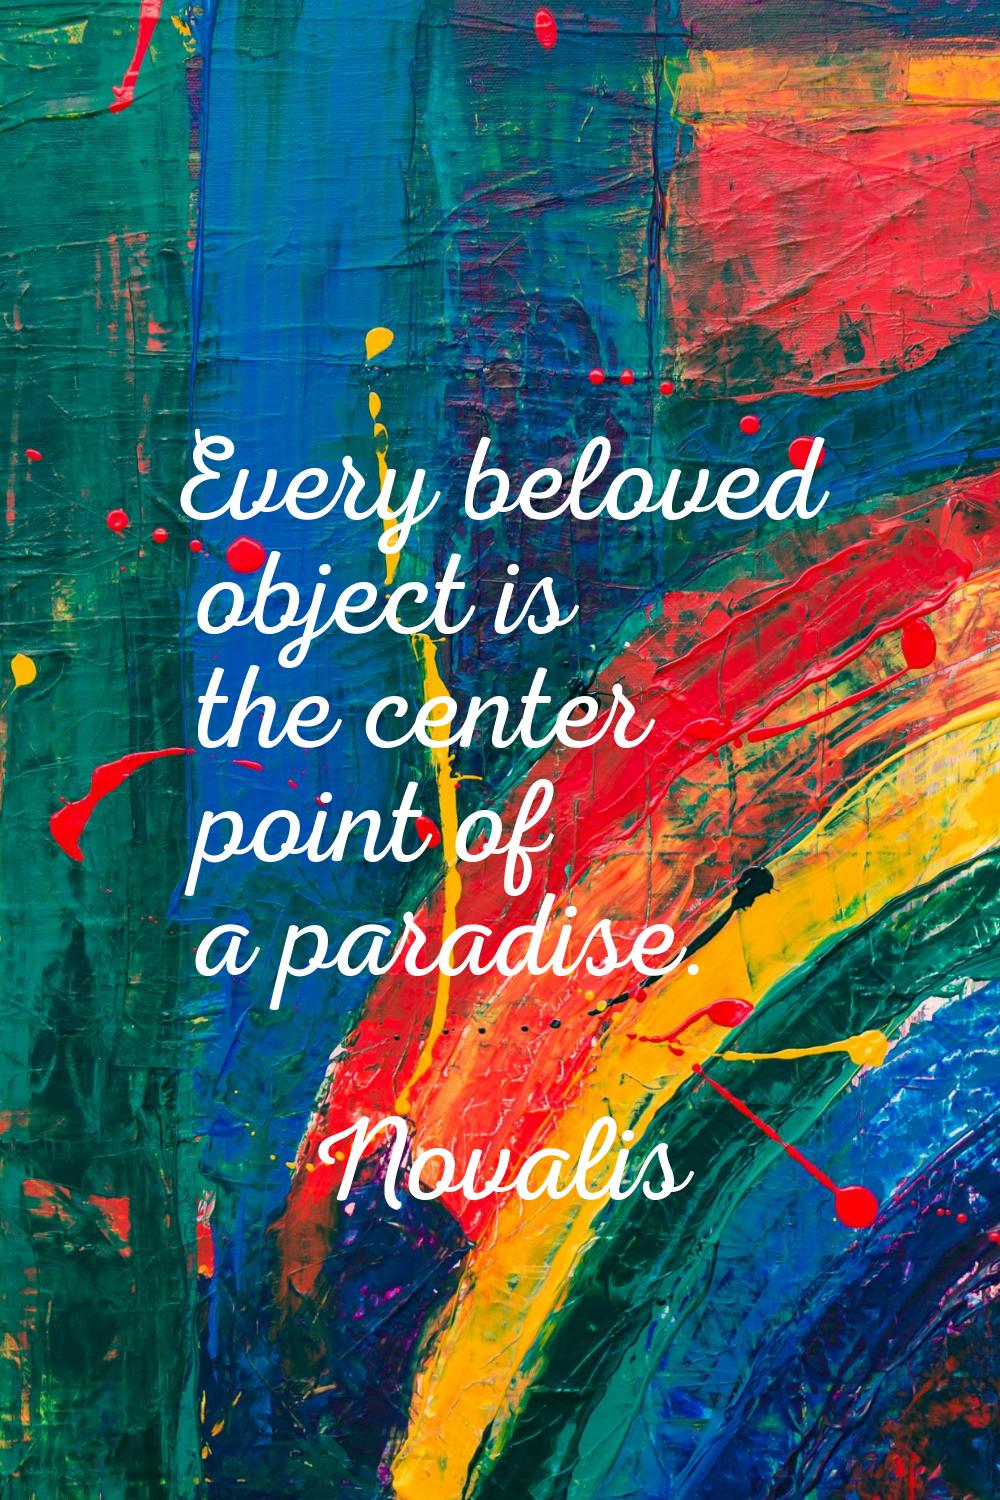 Every beloved object is the center point of a paradise.